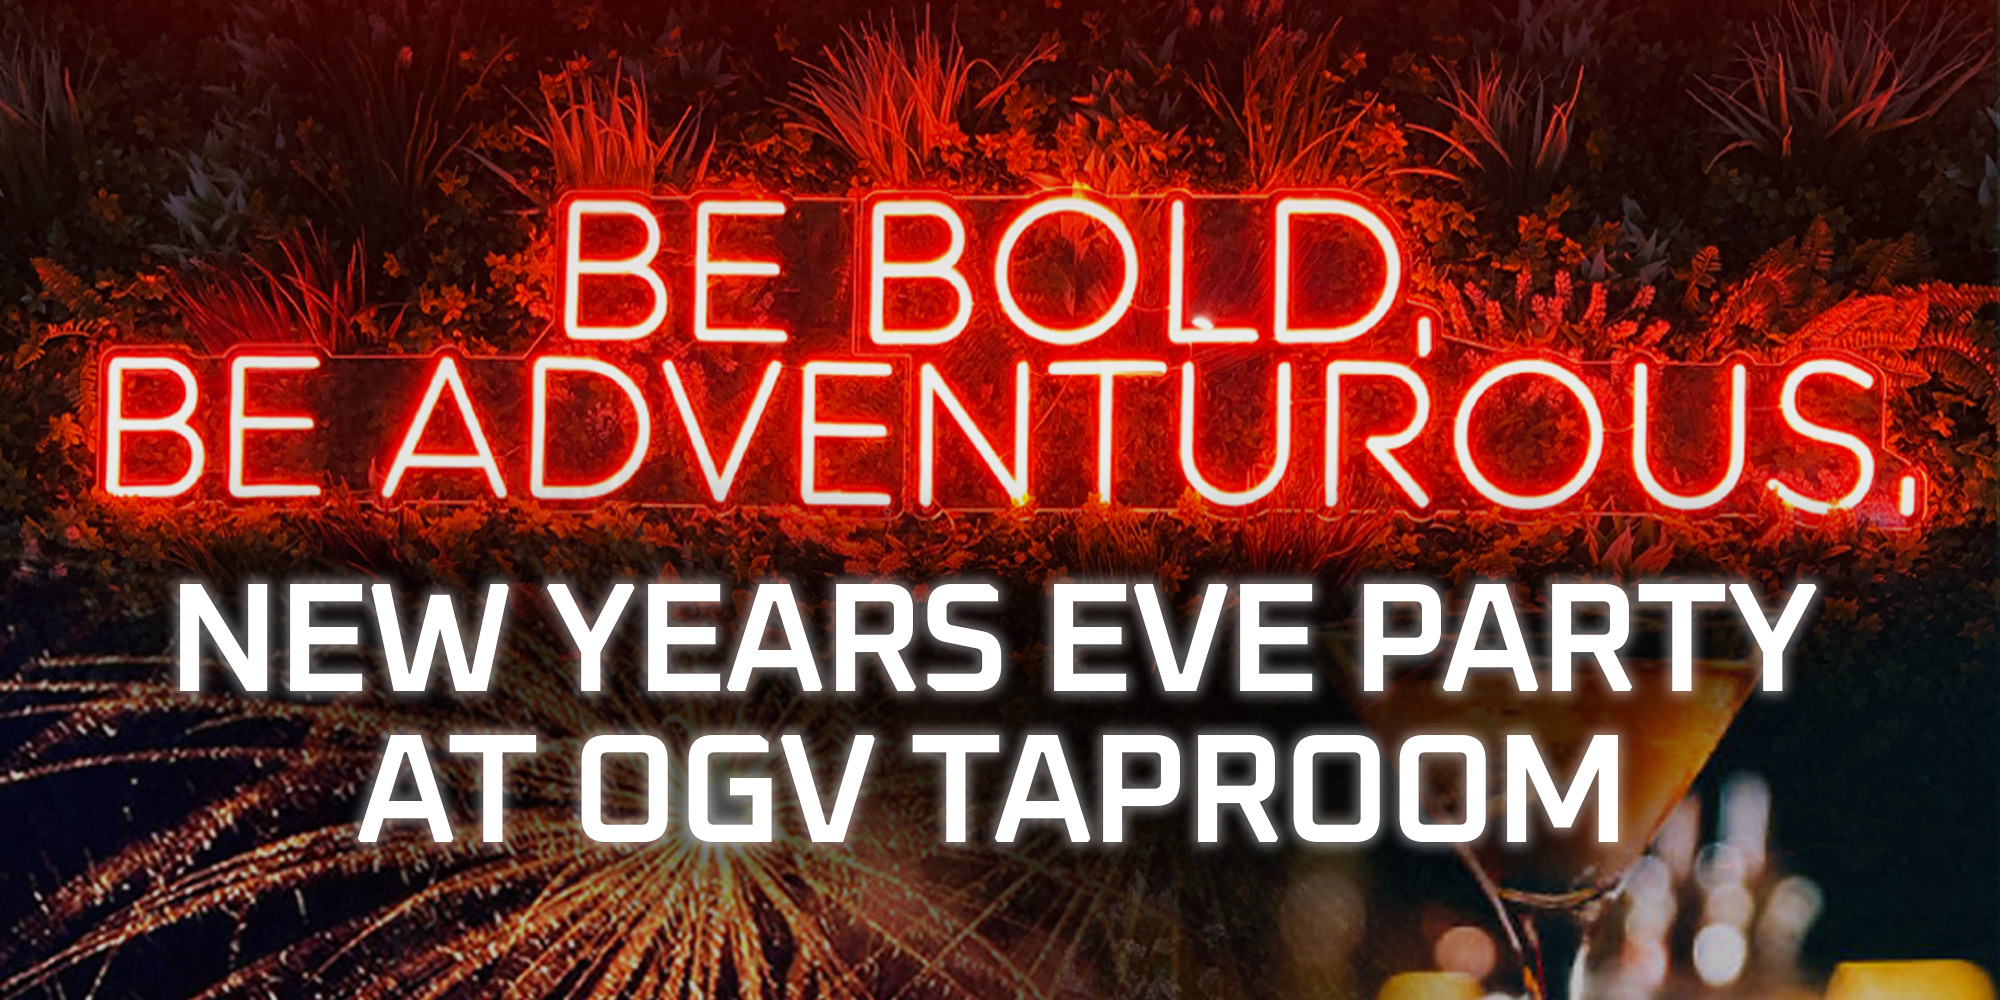 NEW YEARS EVE AT OGV TAPROOM ABERDEEN